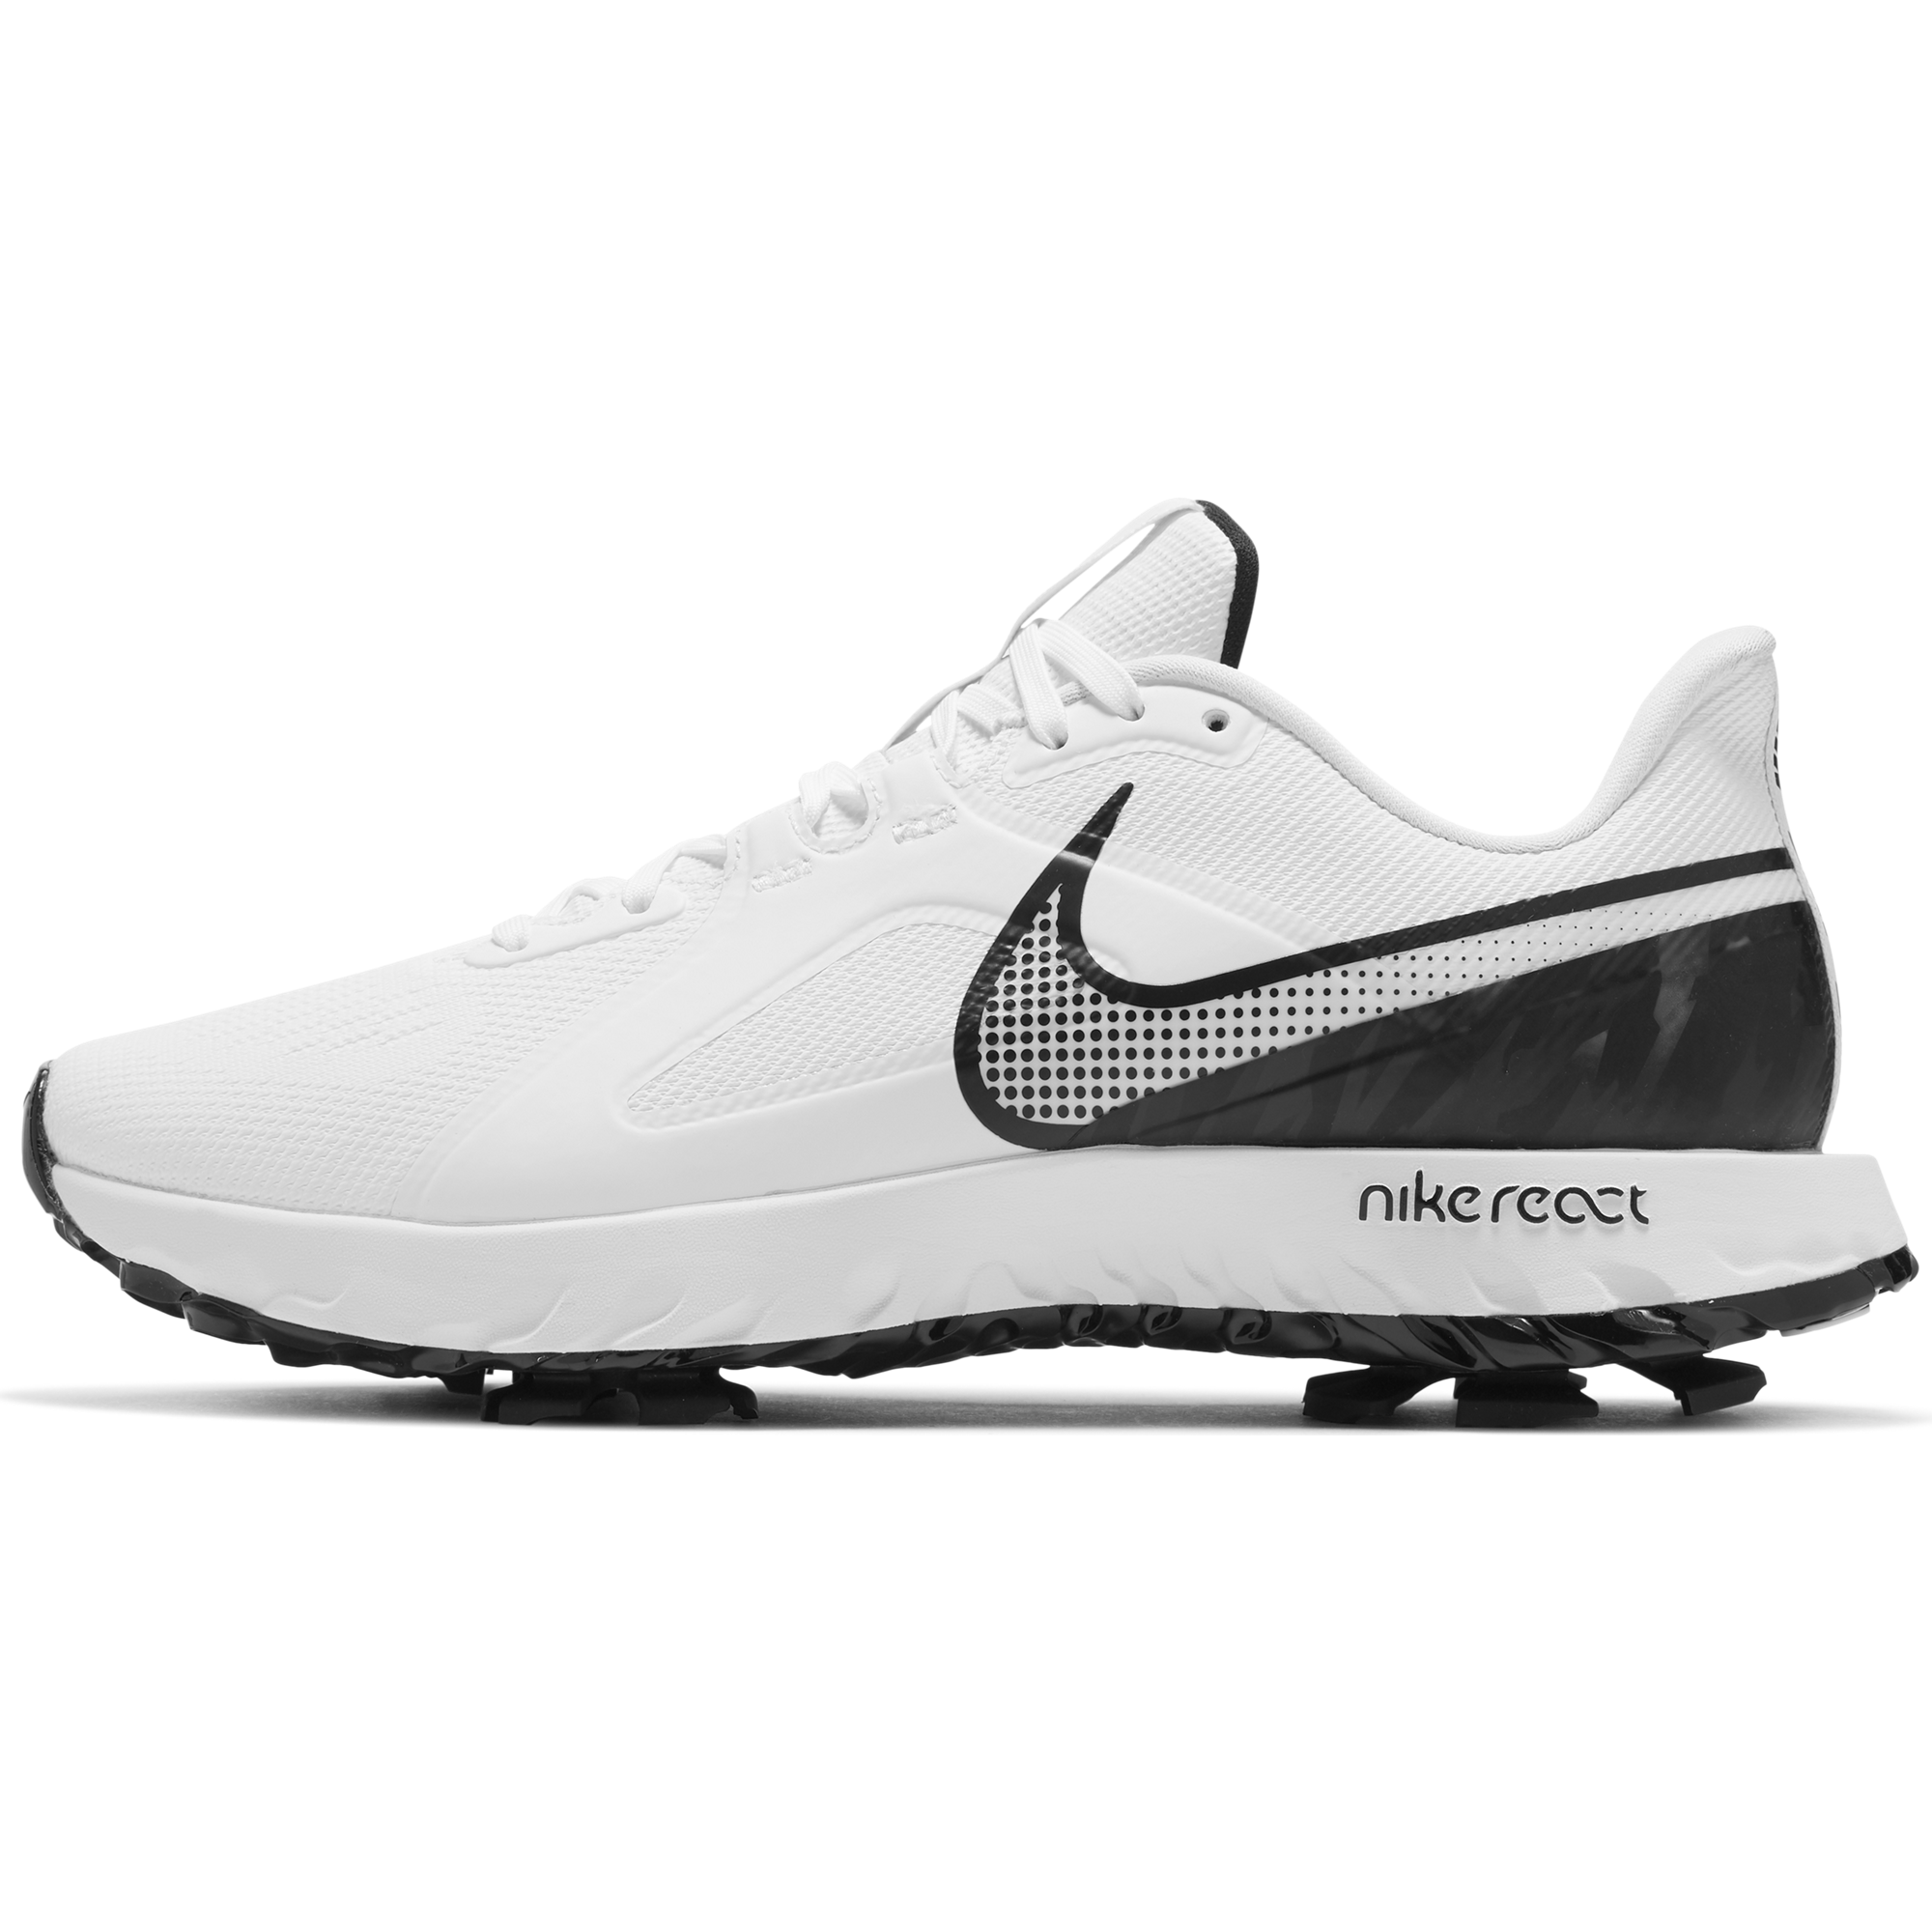 Nike React Infinity Pro – On-Course Comfort Redefined